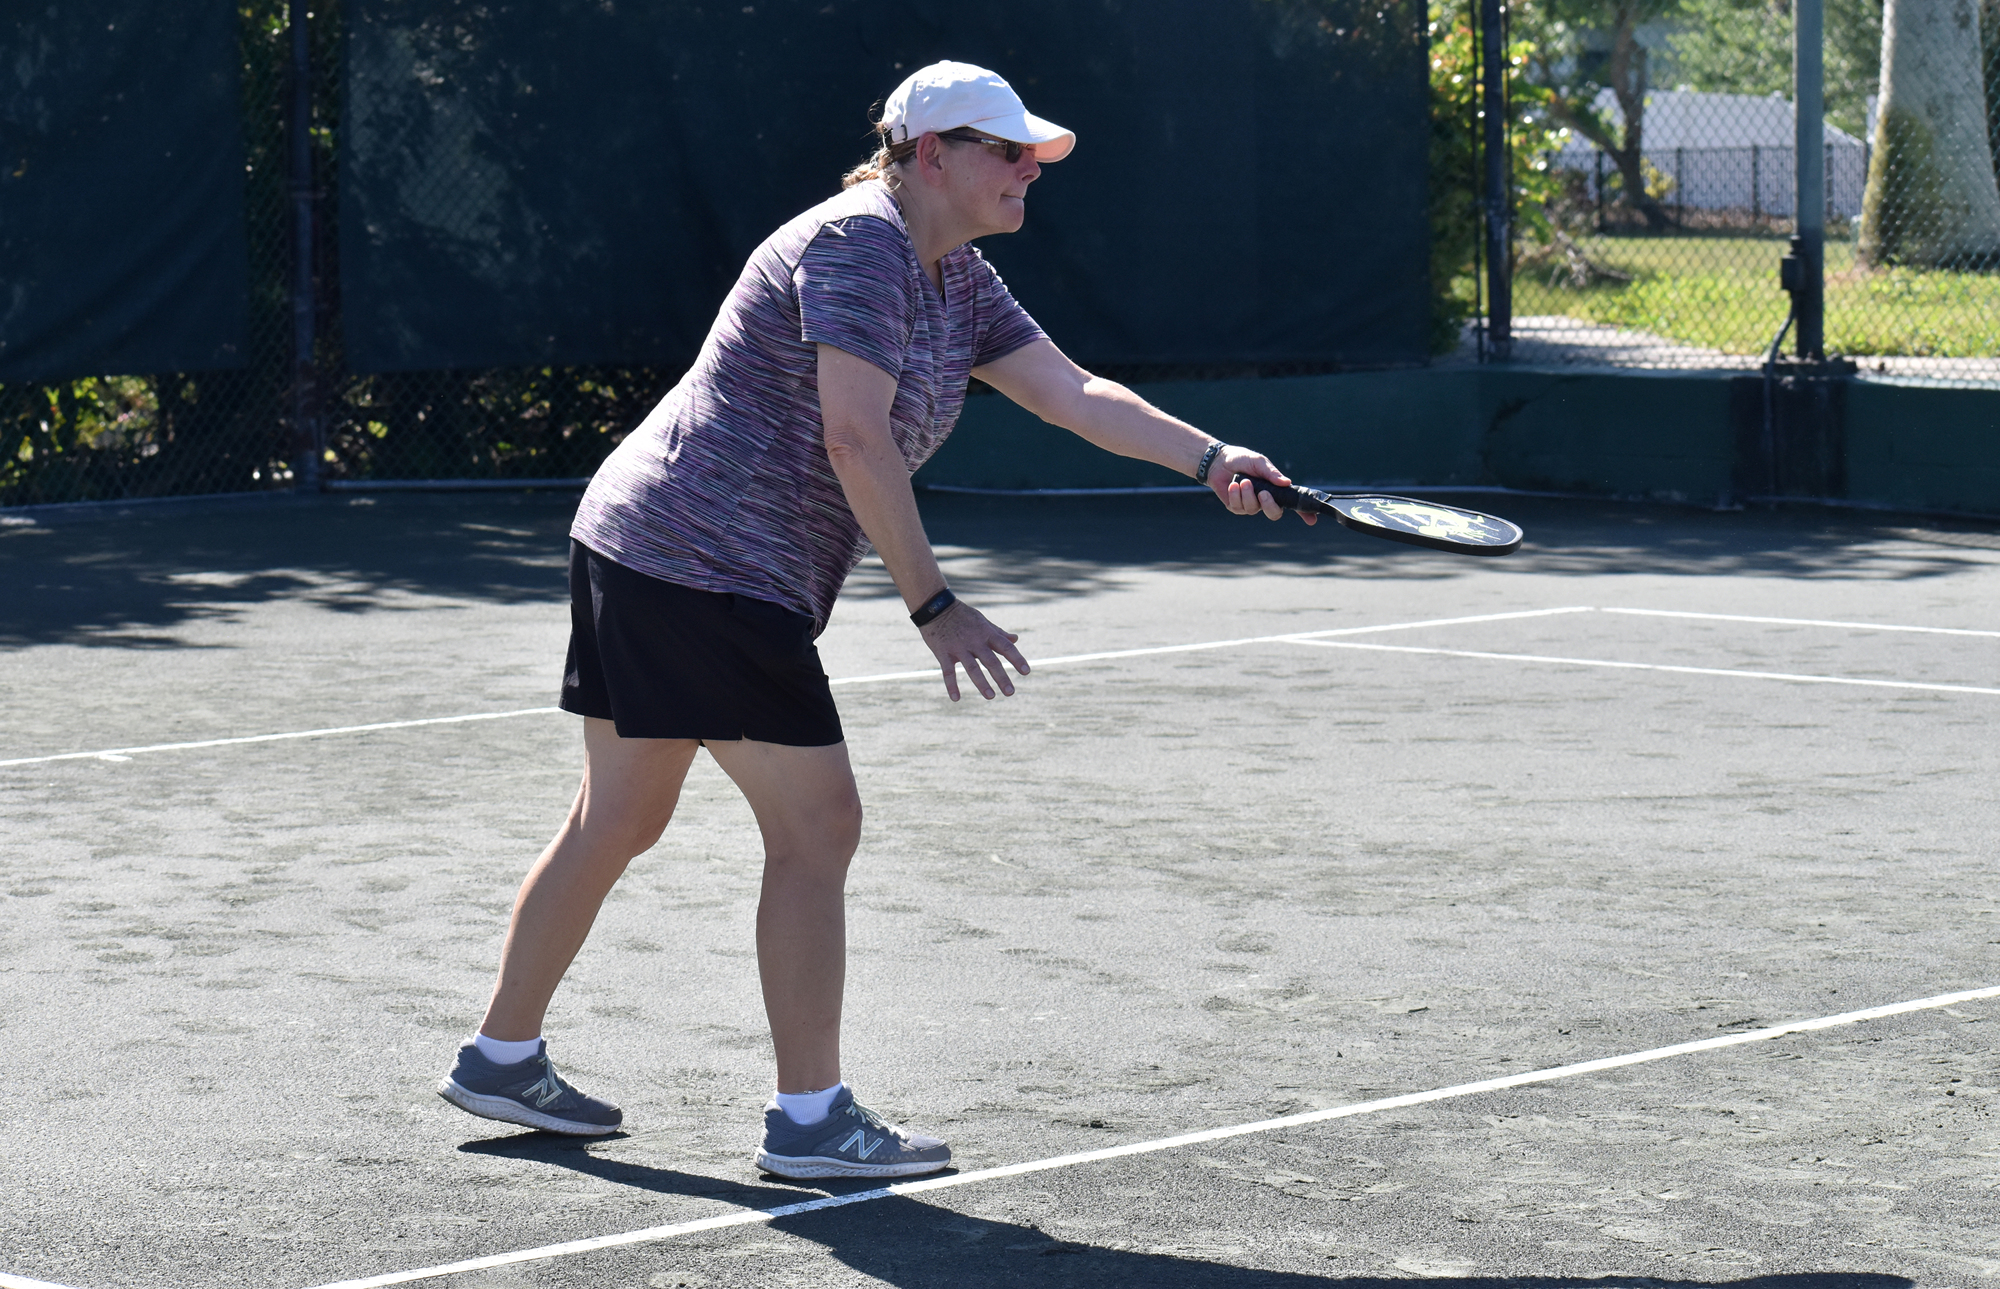 Deb Weber plays beckyball, a game created by Yoram Ariely that combines pickleball and tennis.